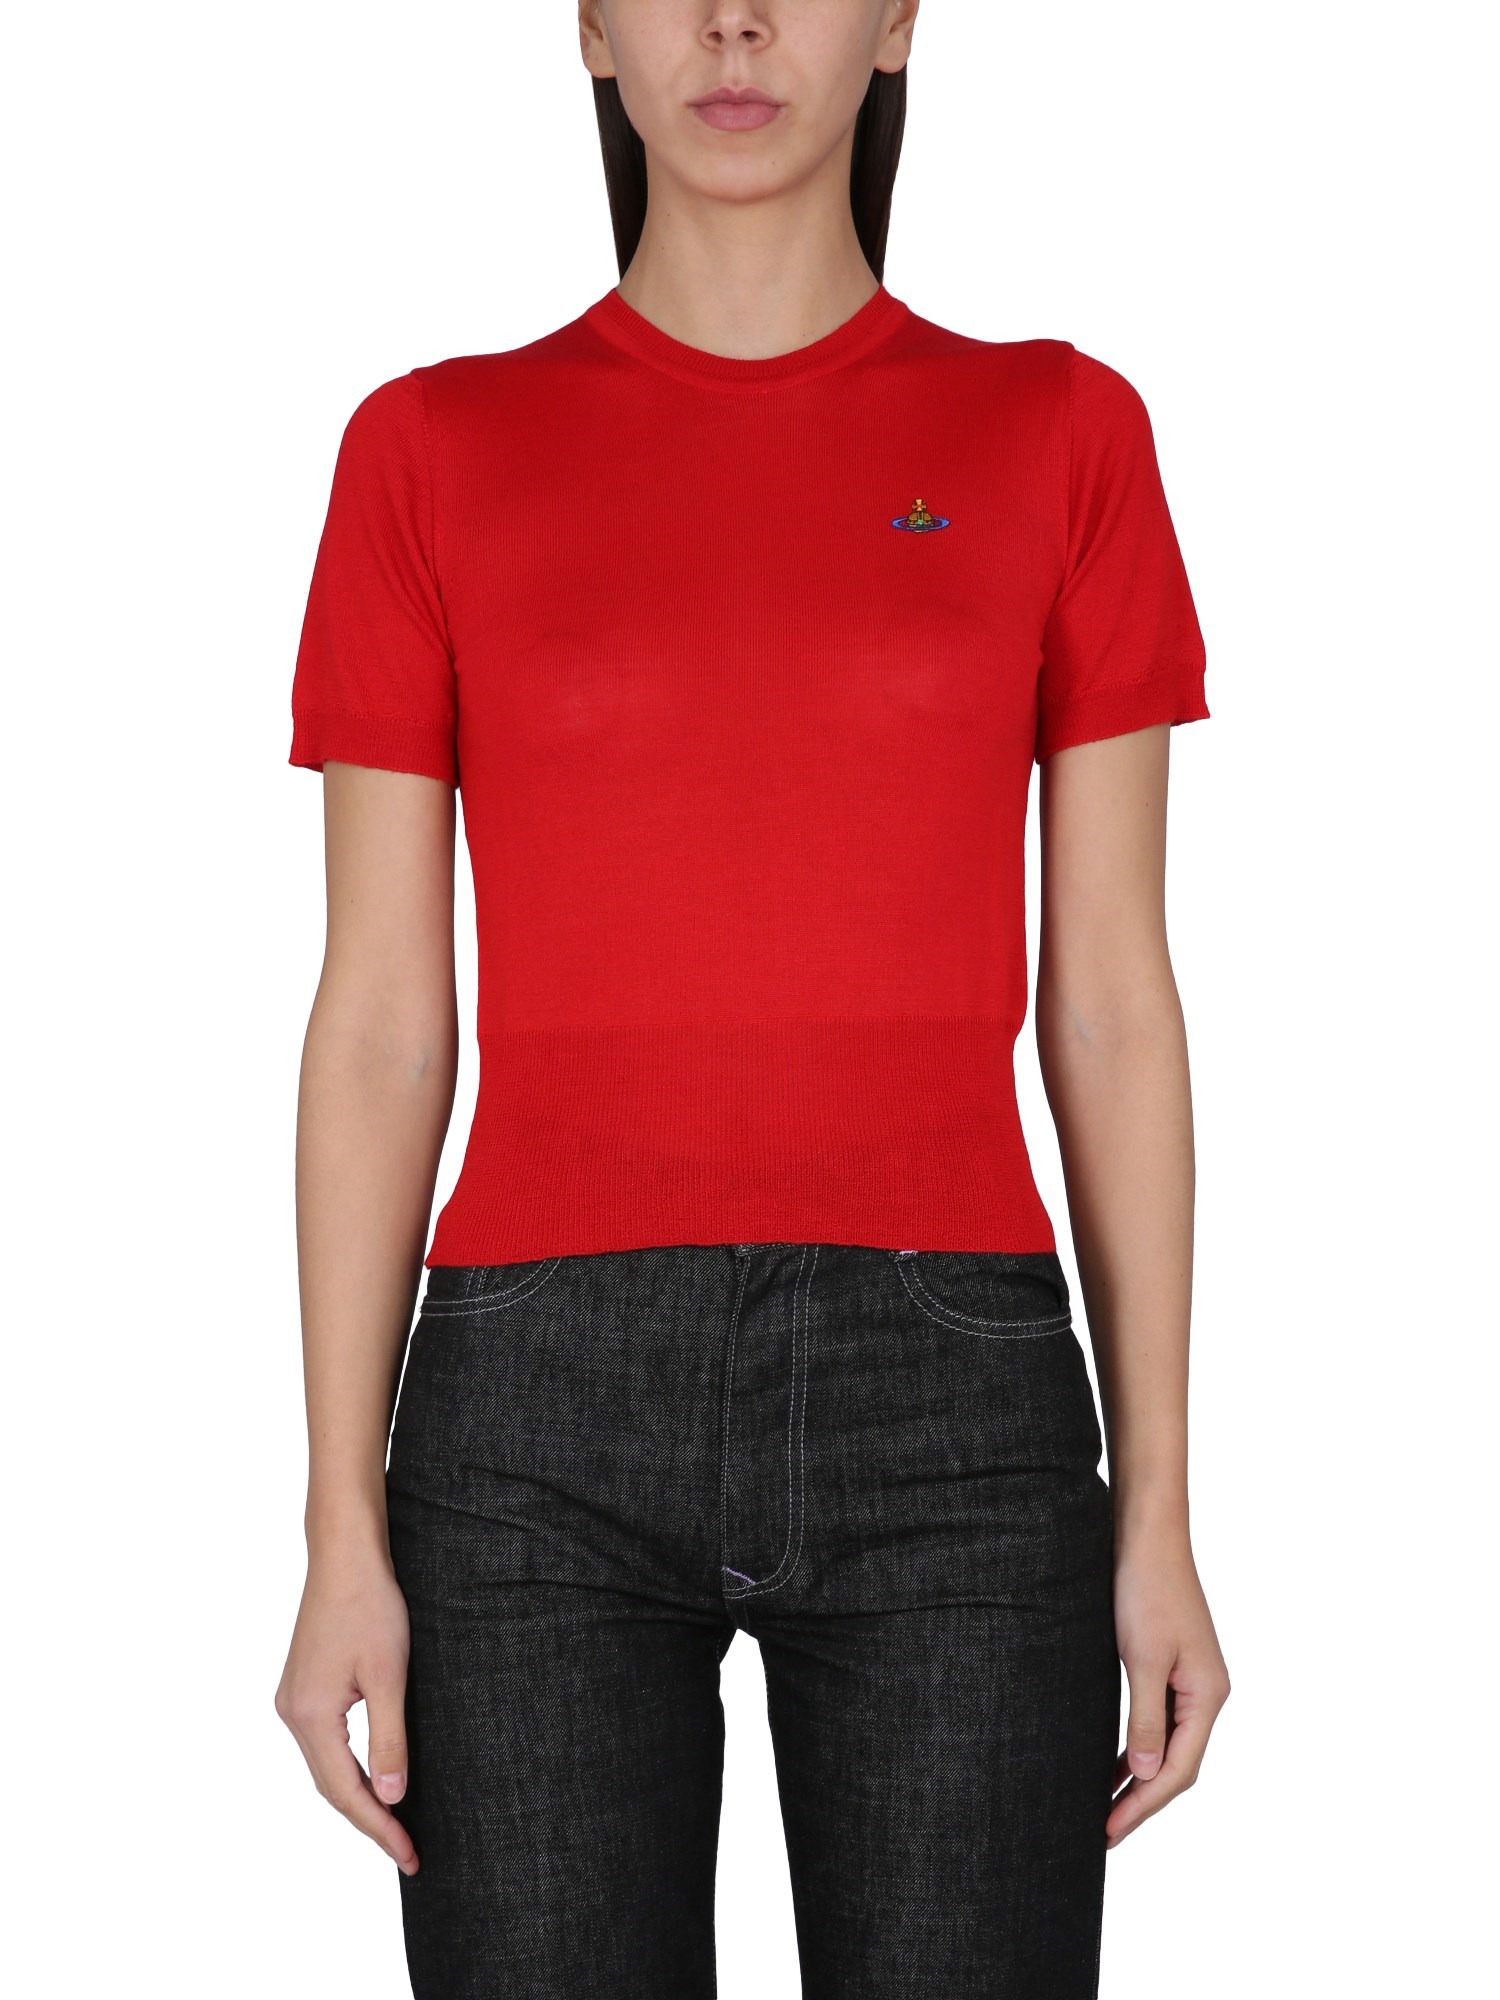 Vivienne Westwood Bea Shirt In Red